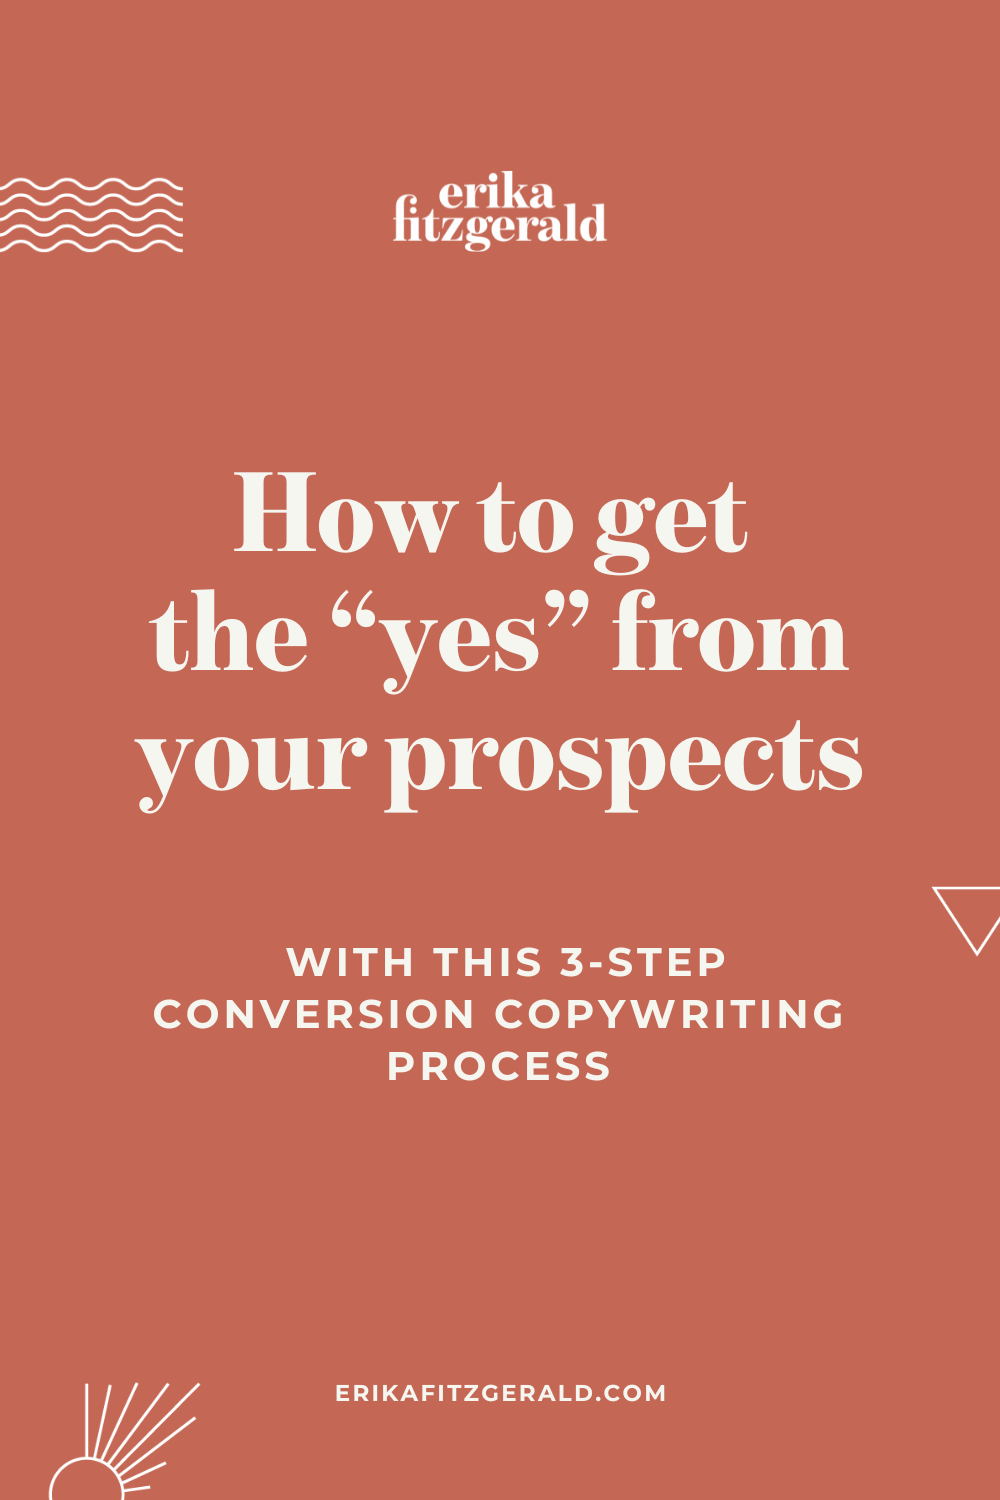 Graphic with text that says "how to get the yes with this 3-step conversion copywriting process"